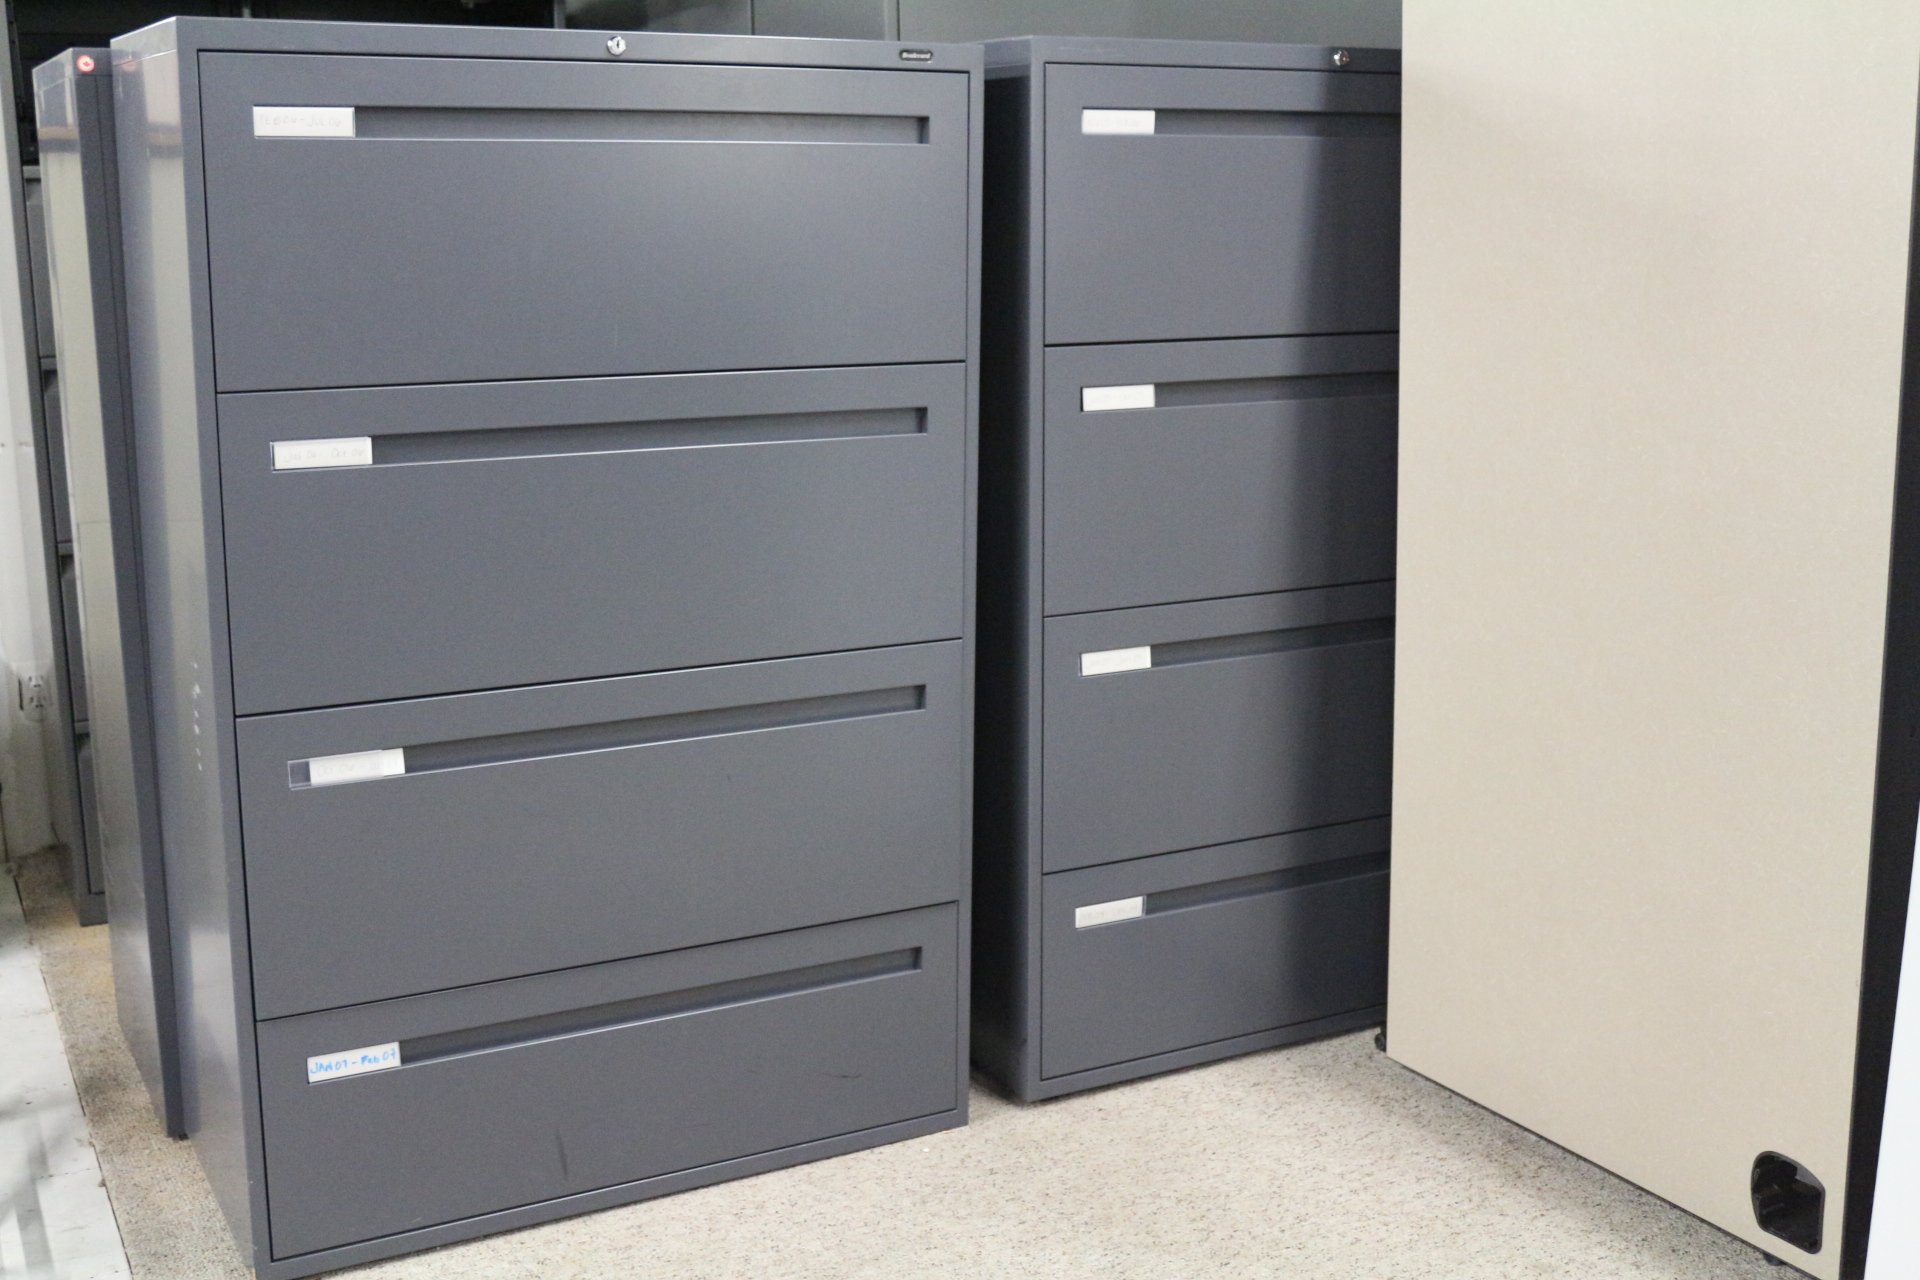 3Dr 30"Wx18"Dx41"H Lateral File Cabinet by Teknion in Gray w/ Lock & Key 